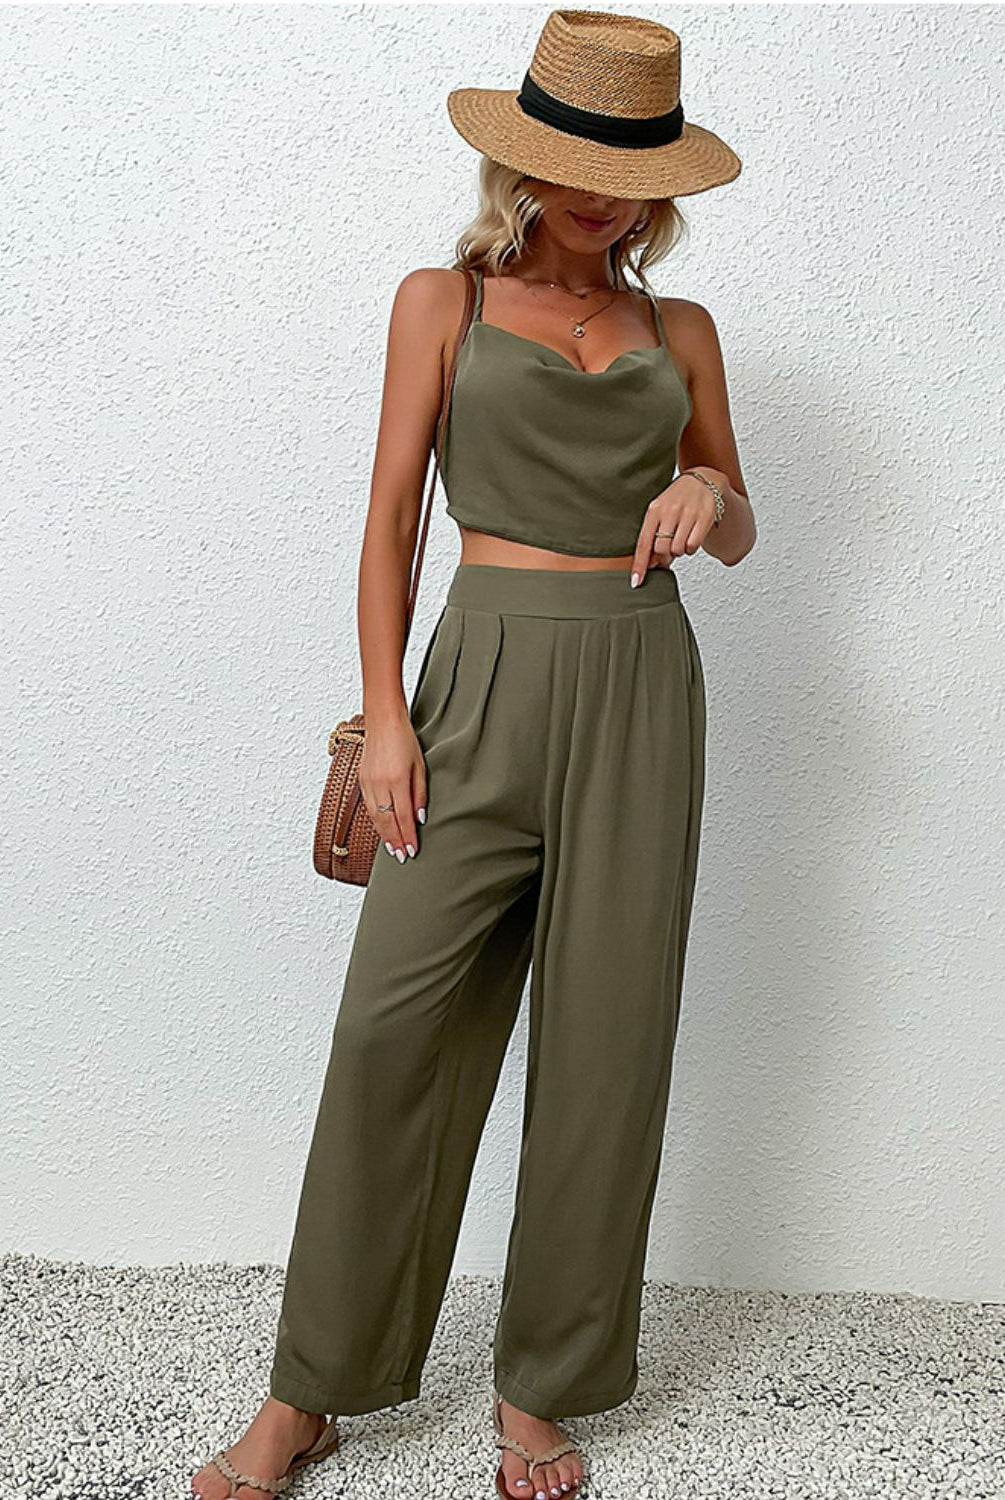 Light Gray Hustle & Heart Crisscross Back Cropped Top and Pants Set Outfit Sets